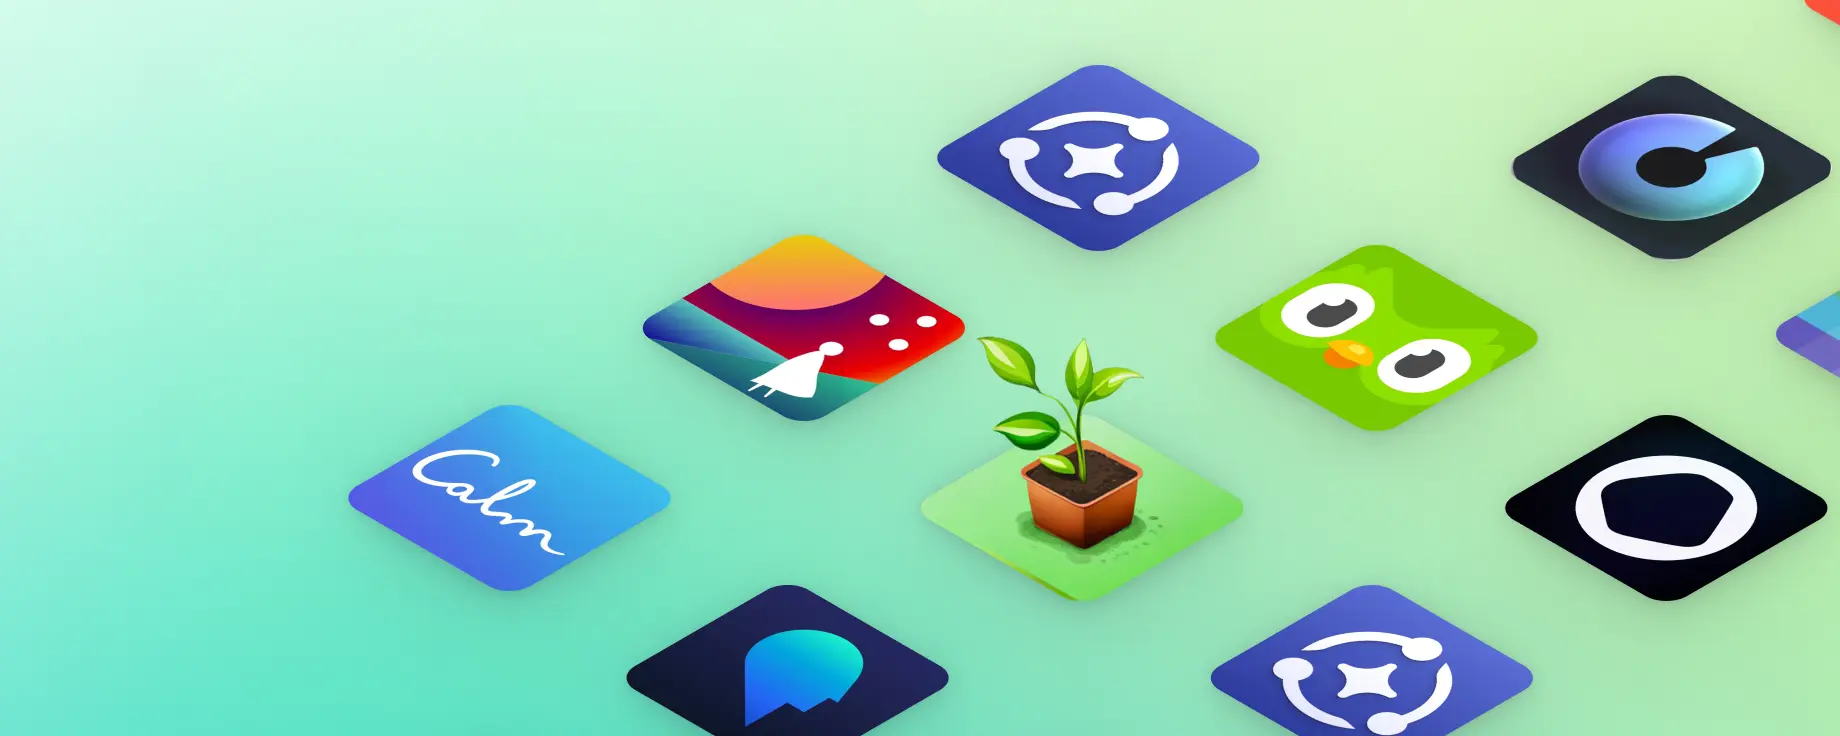 Best Apps for Personal Growth